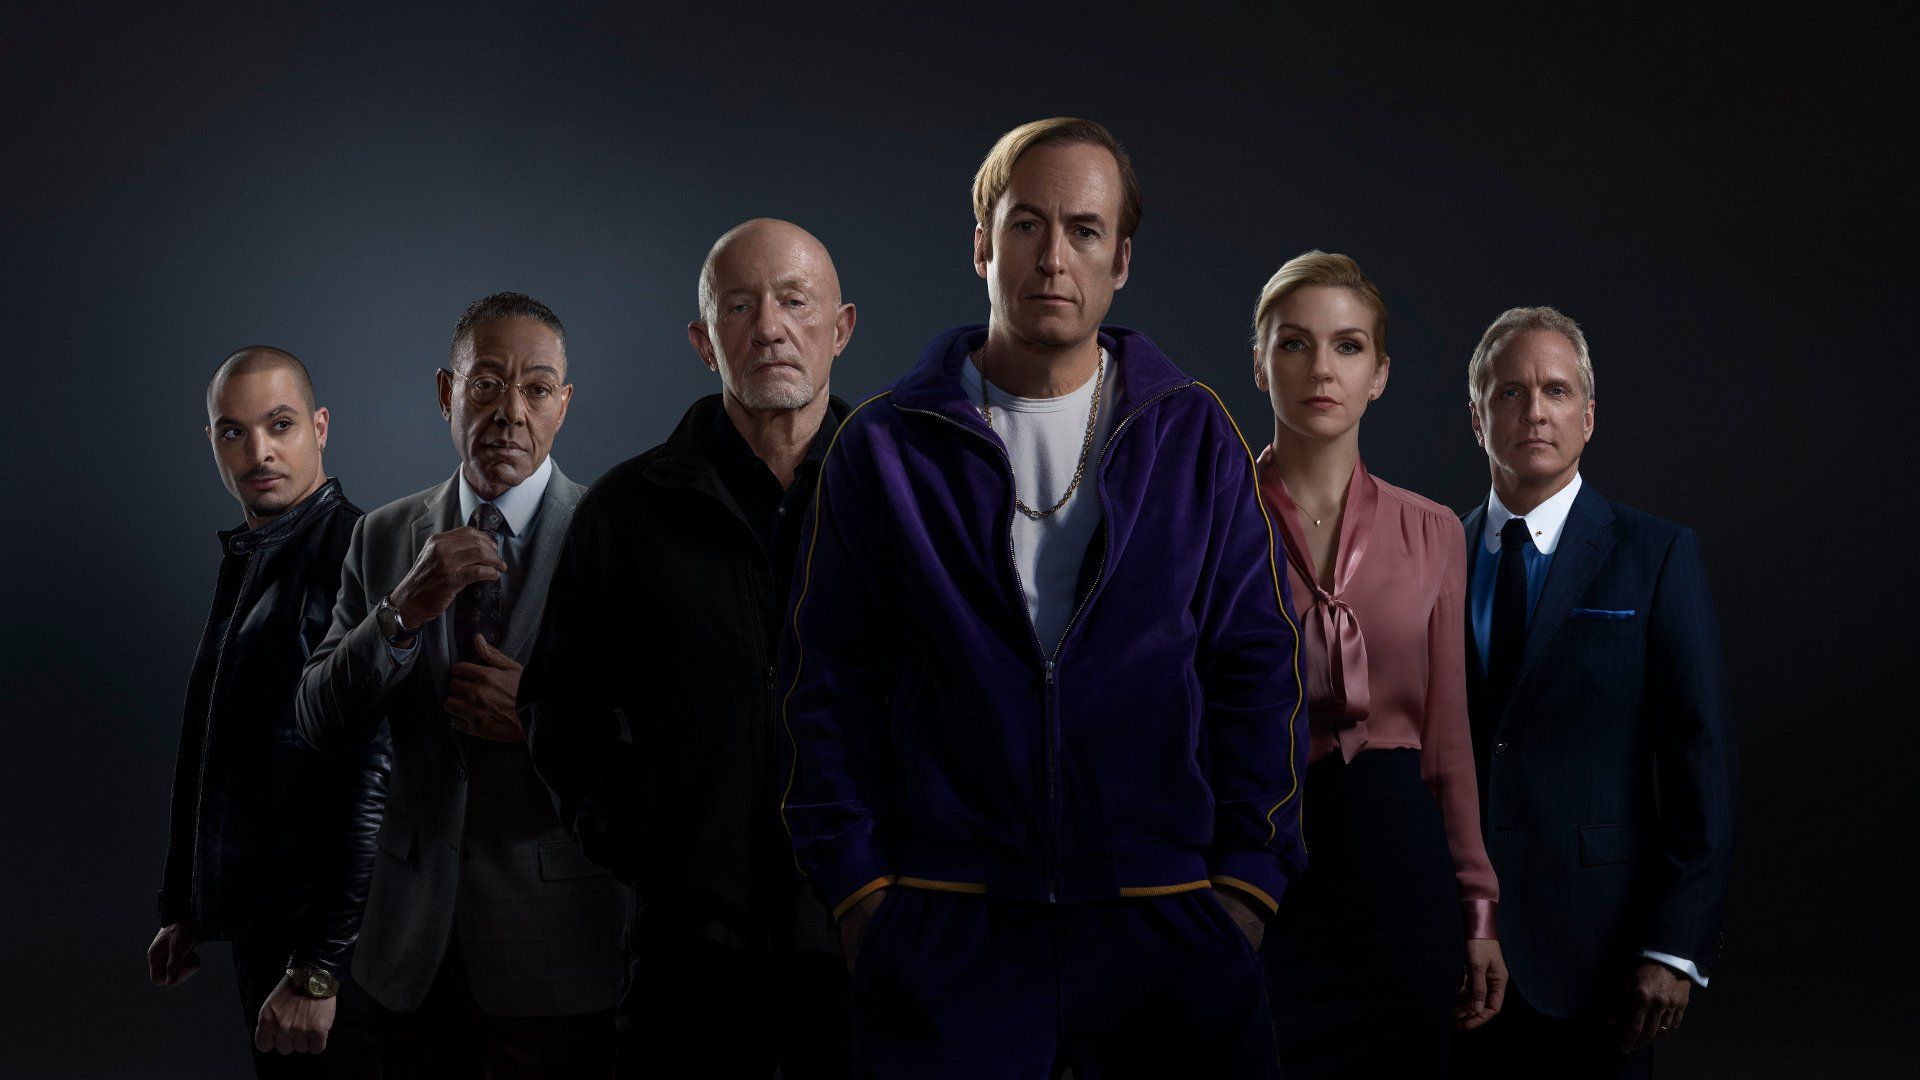 Better Call Saul has finally embraced its destiny as a Breaking Bad prequel